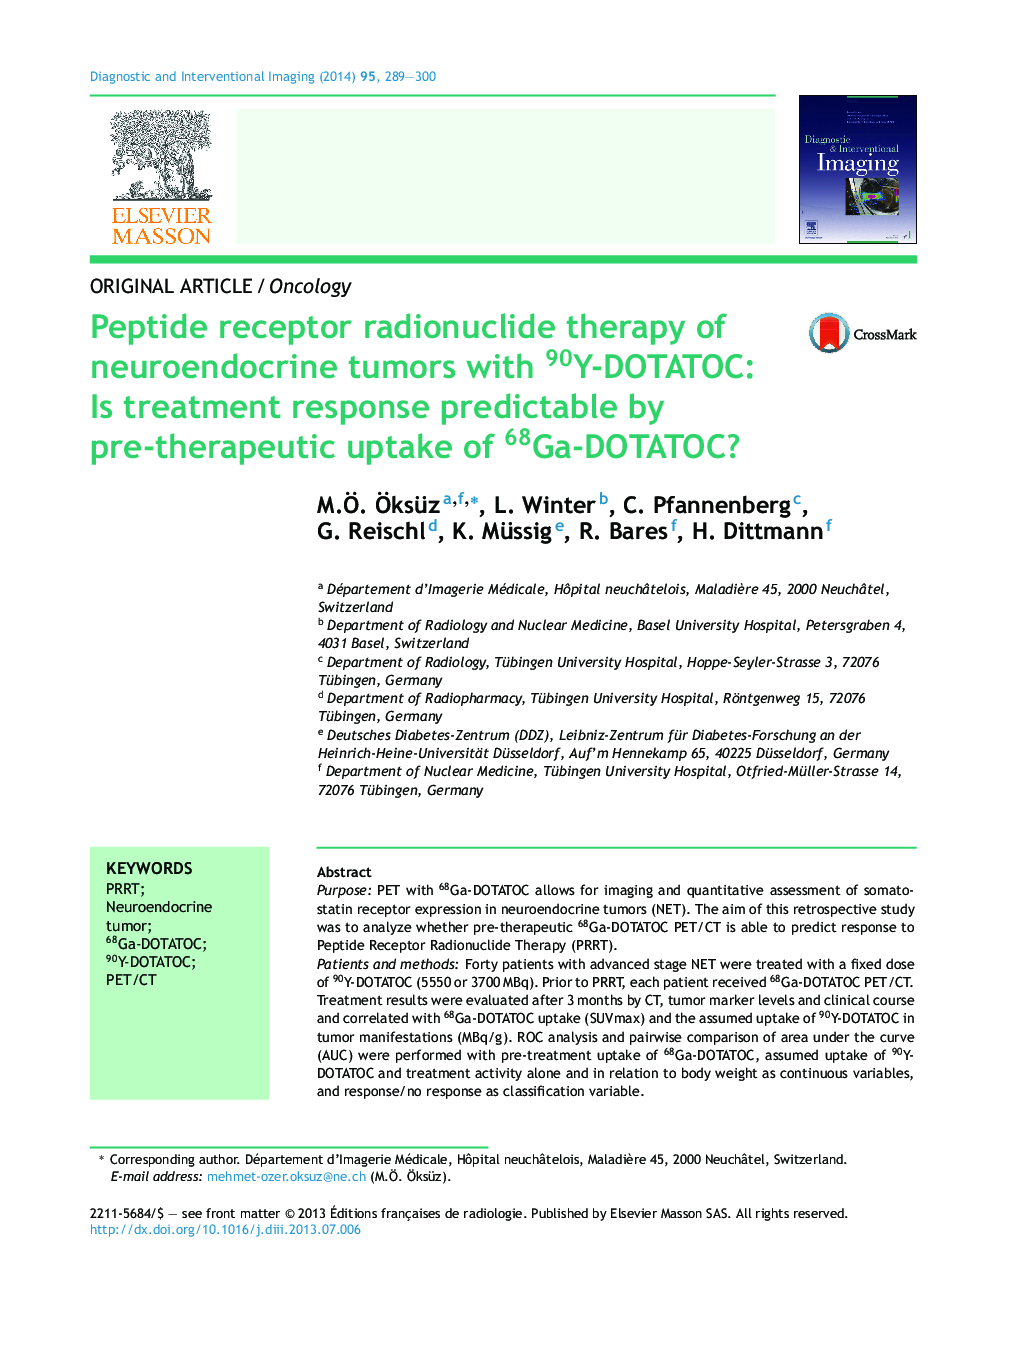 Peptide receptor radionuclide therapy of neuroendocrine tumors with 90Y-DOTATOC: Is treatment response predictable by pre-therapeutic uptake of 68Ga-DOTATOC?